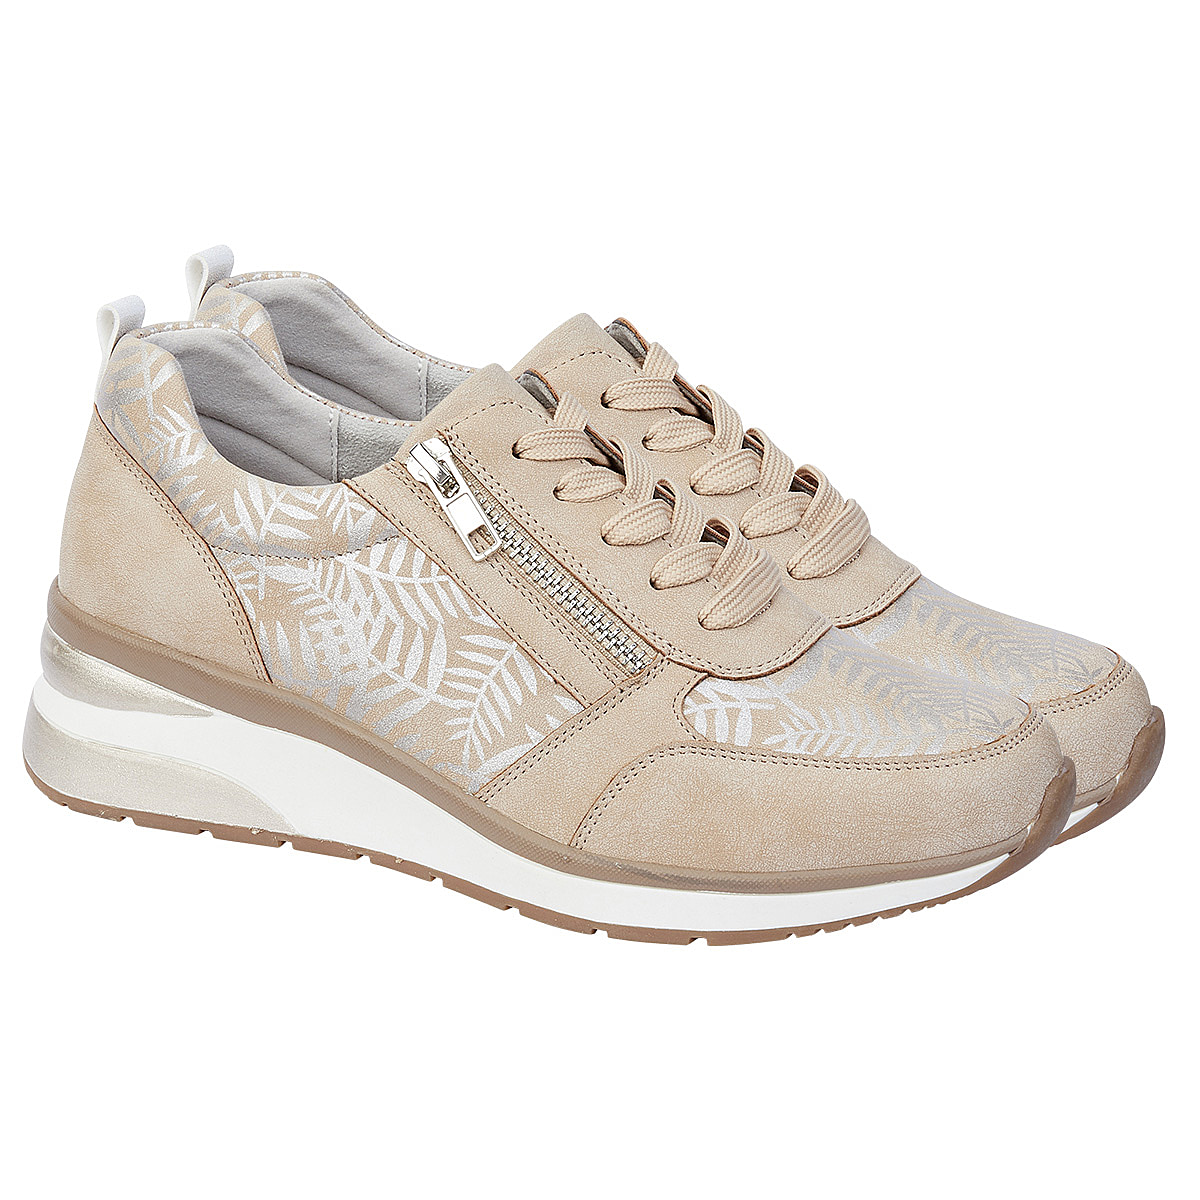 Lace Up Zip Fastening TROPICAL Ladies Shoes (Size 6) - Beige